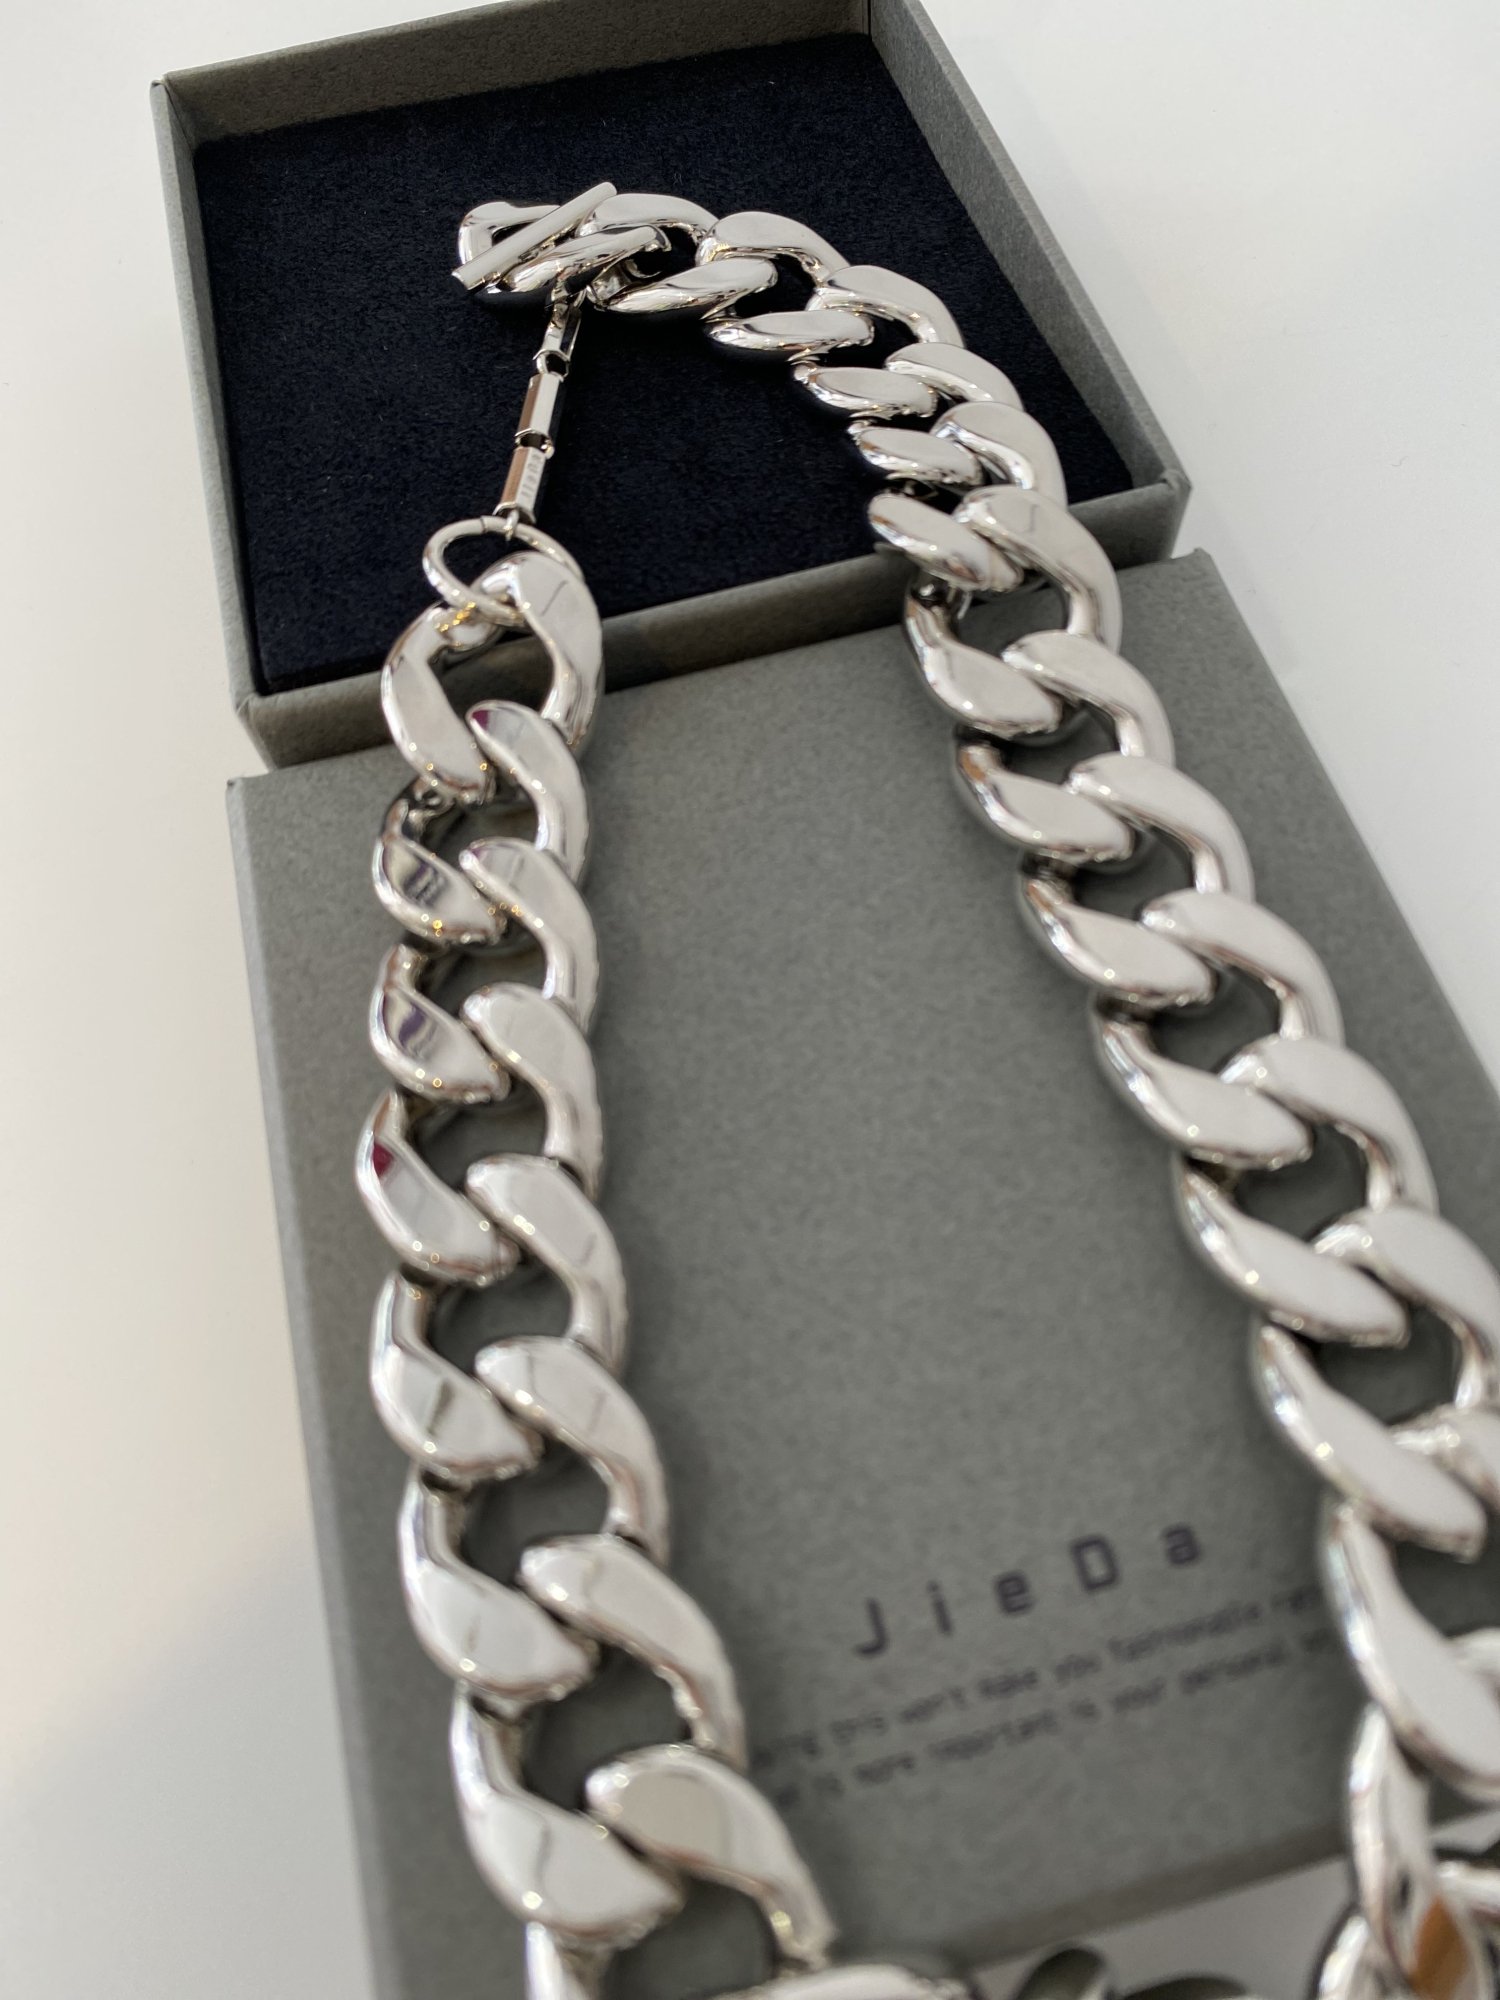 JieDa<br />SWITCHING WIDE CHAIN NECKLACE<img class='new_mark_img2' src='https://img.shop-pro.jp/img/new/icons14.gif' style='border:none;display:inline;margin:0px;padding:0px;width:auto;' />